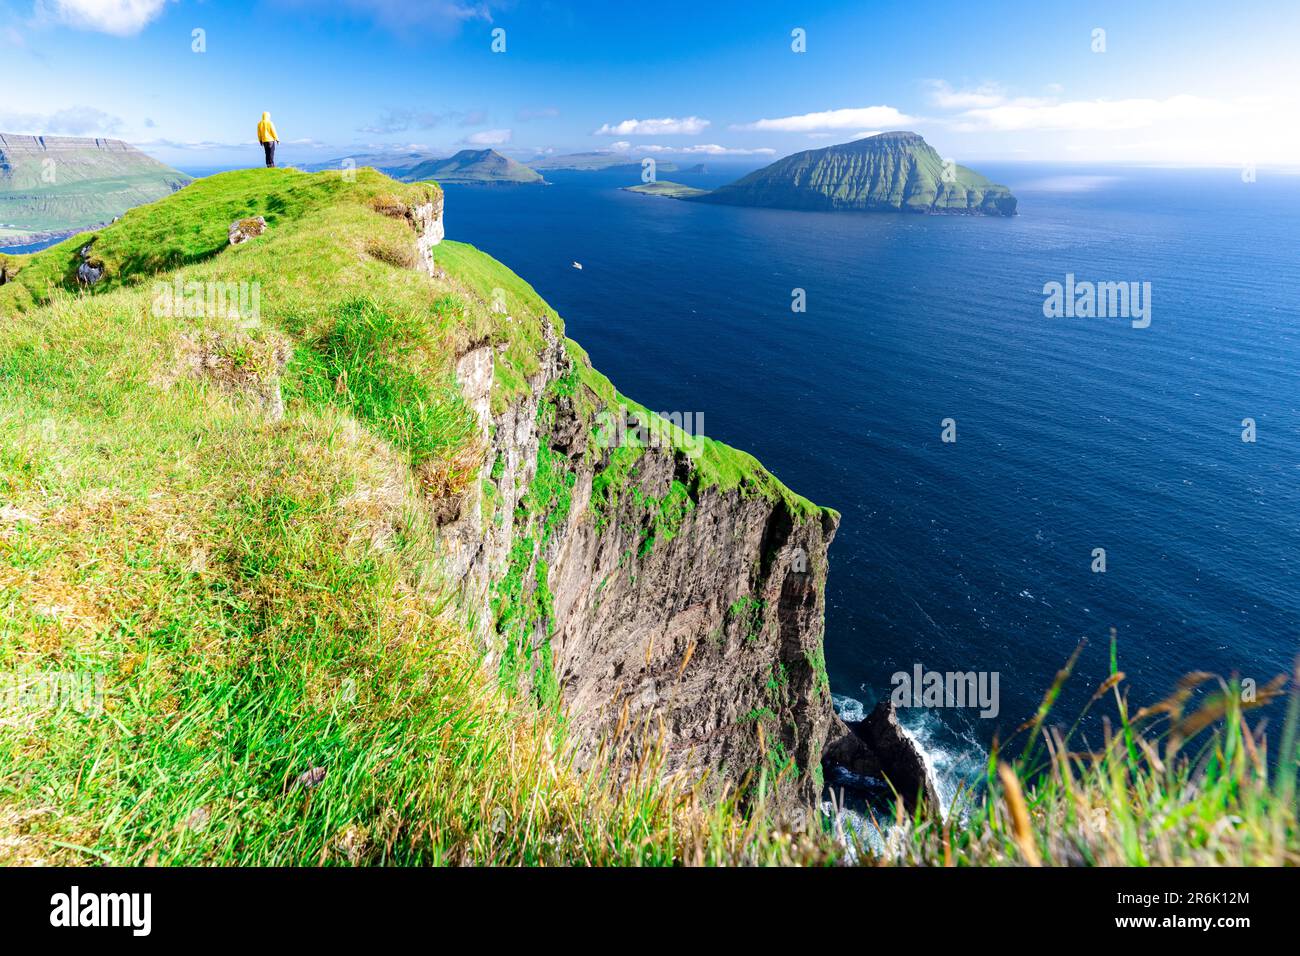 One person admiring the view standing on cliffs above the ocean, Nordradalur, Streymoy Island, Faroe Islands, Denmark, Europe Stock Photo